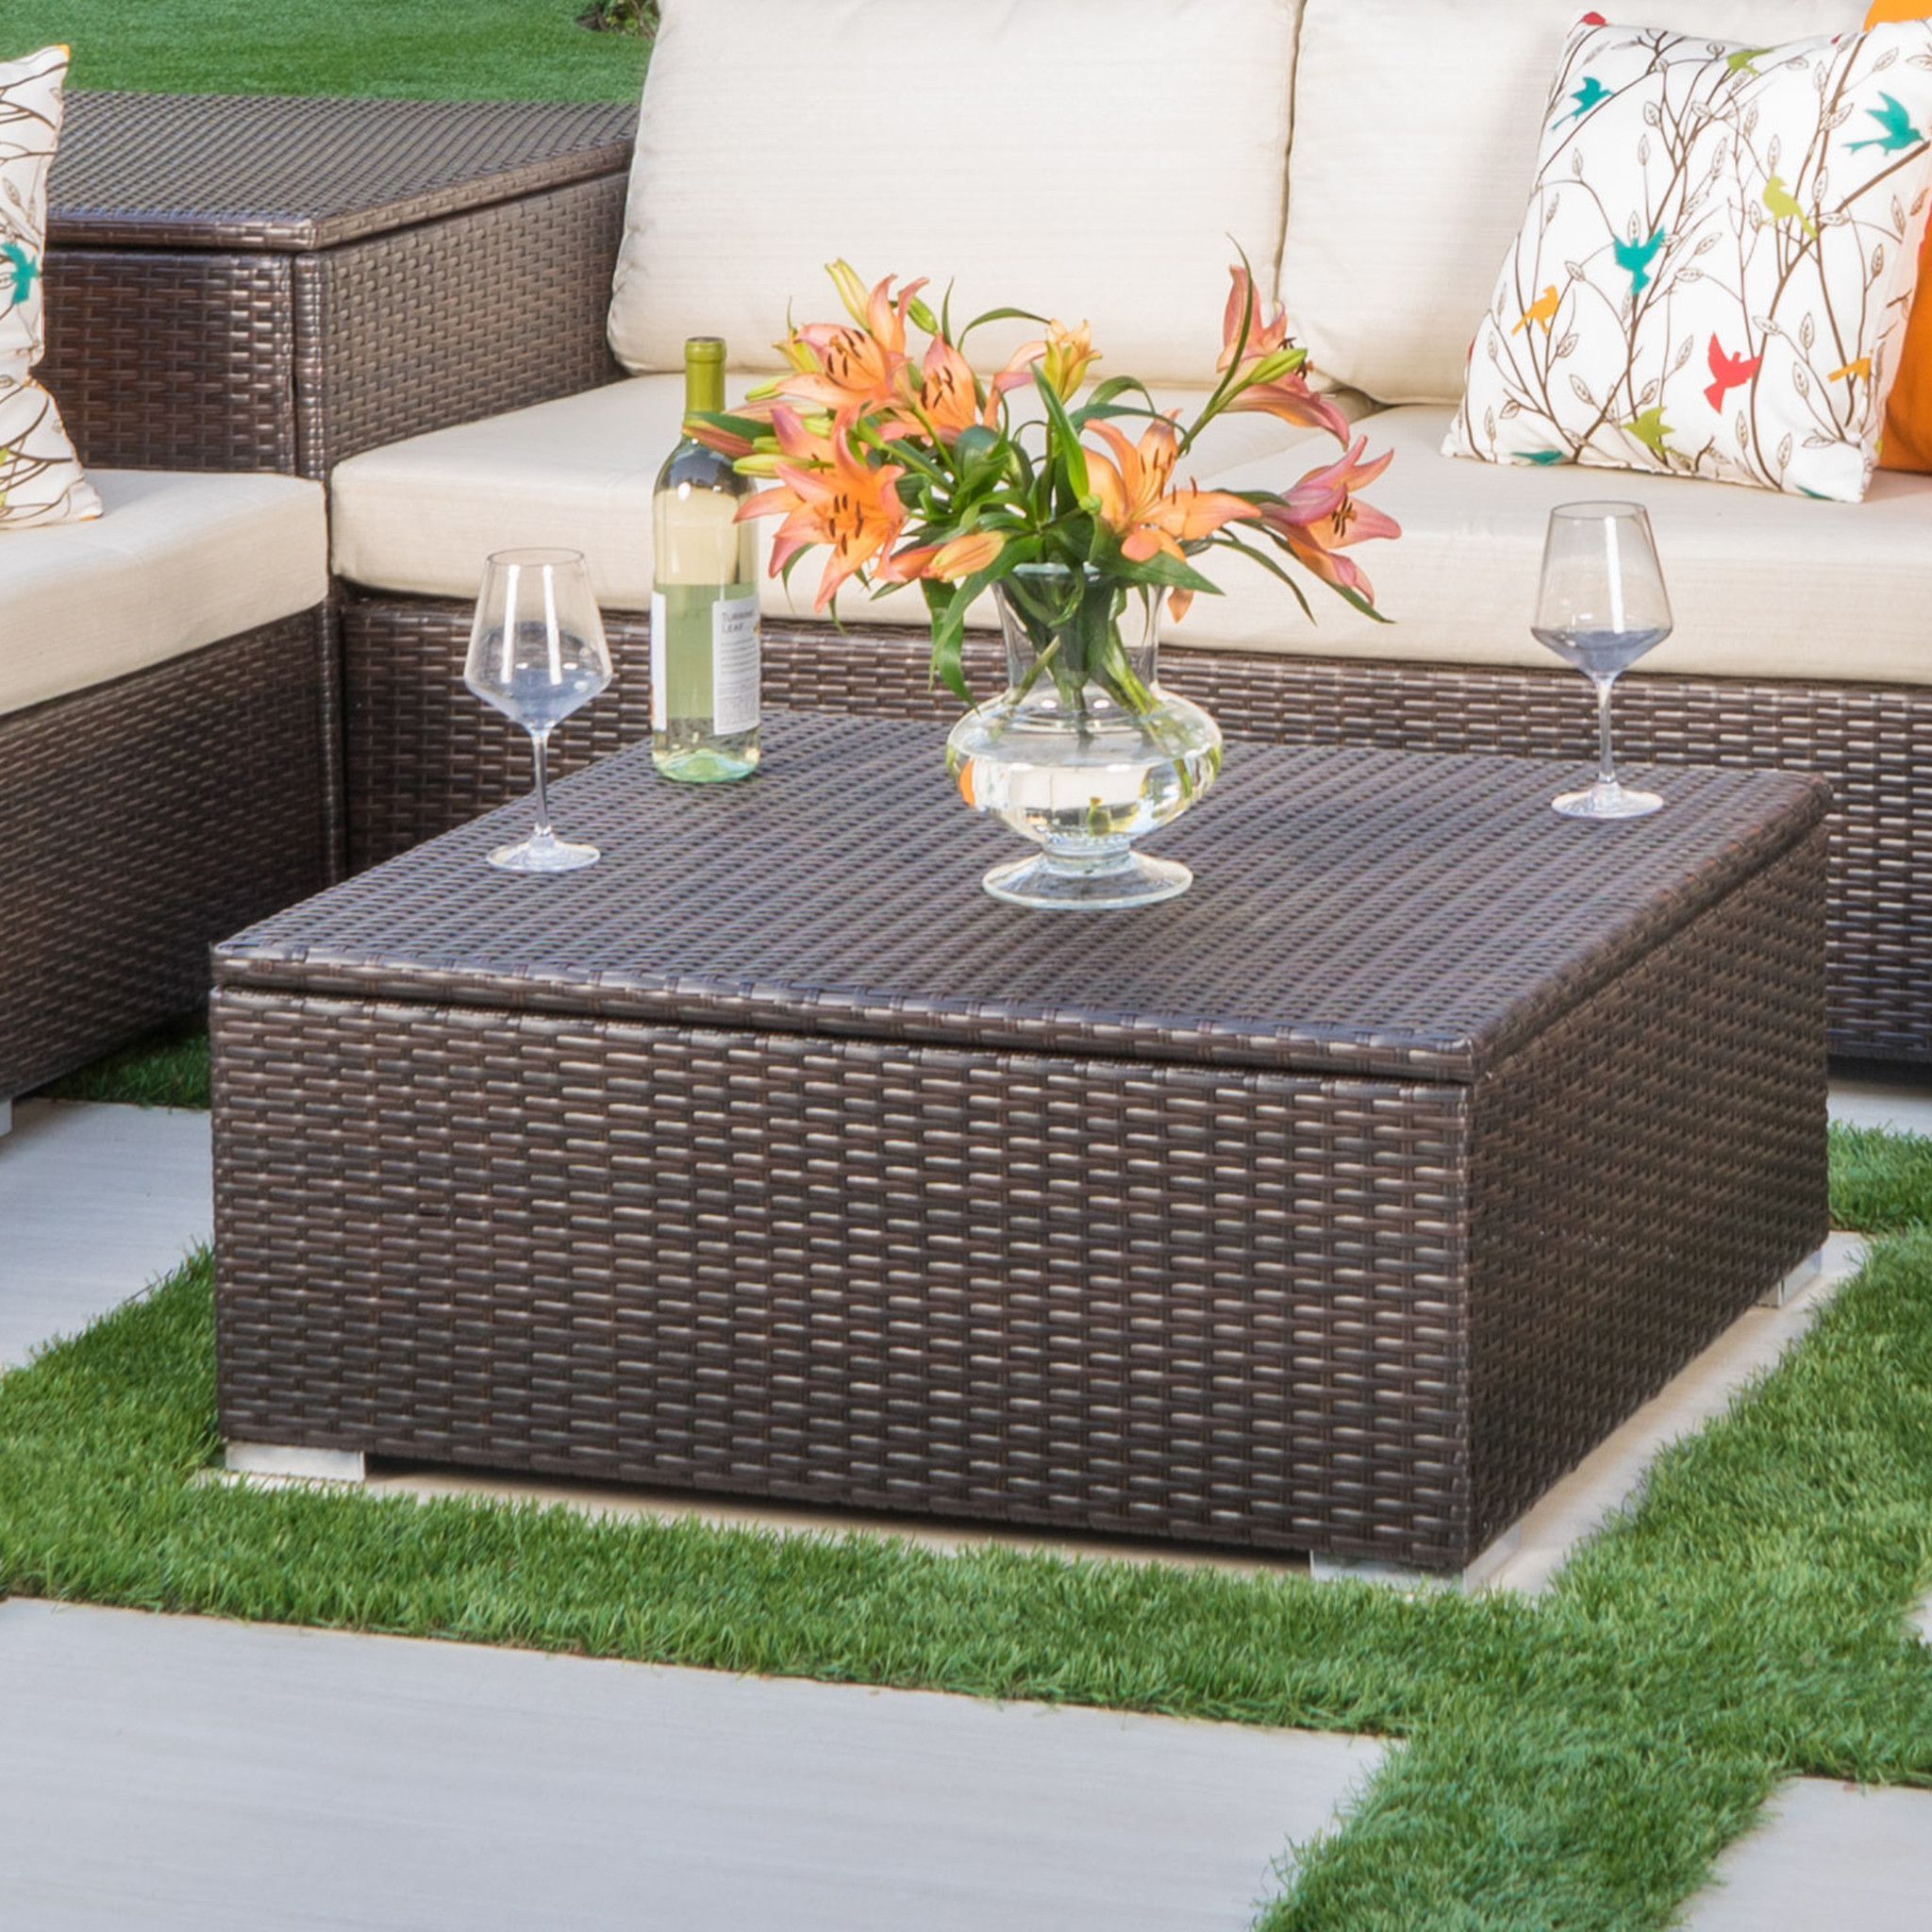 San Louis Obispo Outdoor Wicker Storage Coffee Table Coffee Table Cover Pertaining To Waterproof Coffee Tables (Gallery 6 of 21)